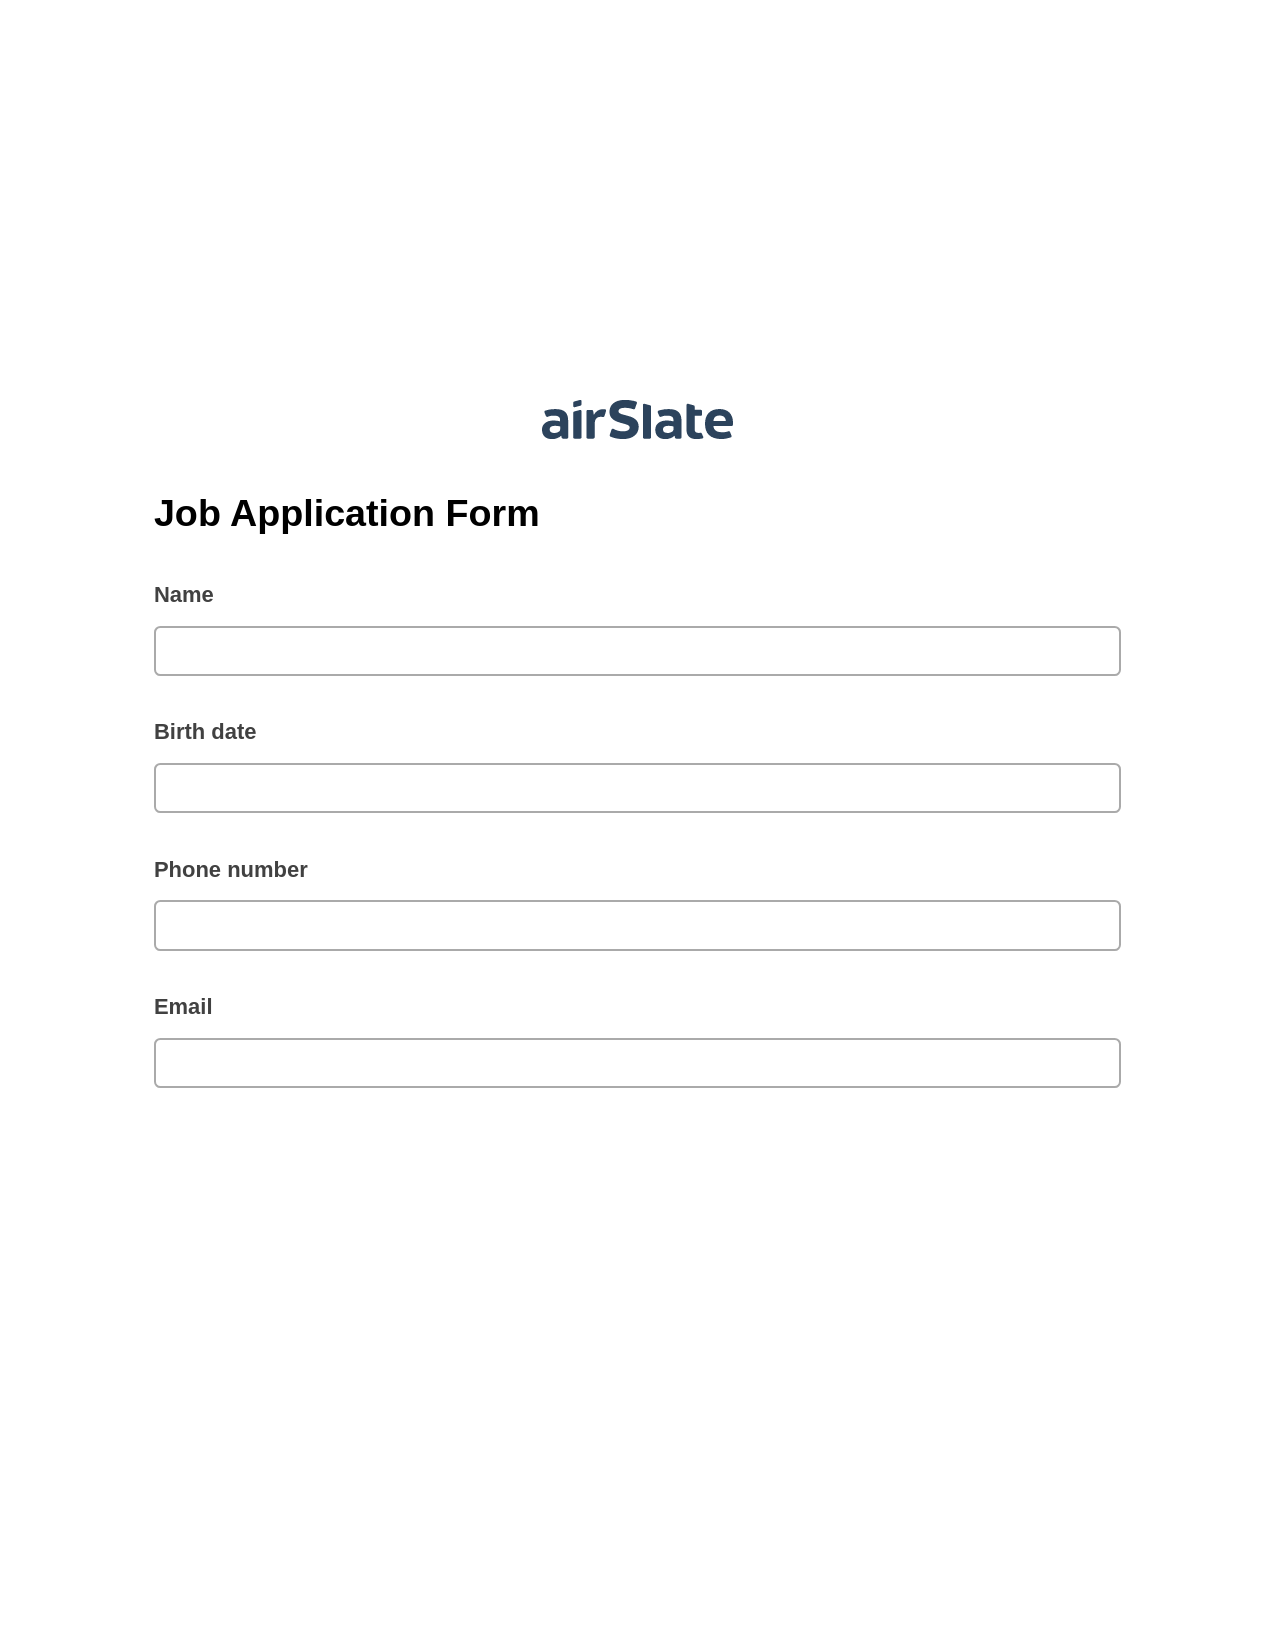 Multirole Job Application Form Pre-fill Dropdown from Airtable, Create MS Dynamics 365 Records Bot, Post-finish Document Bot